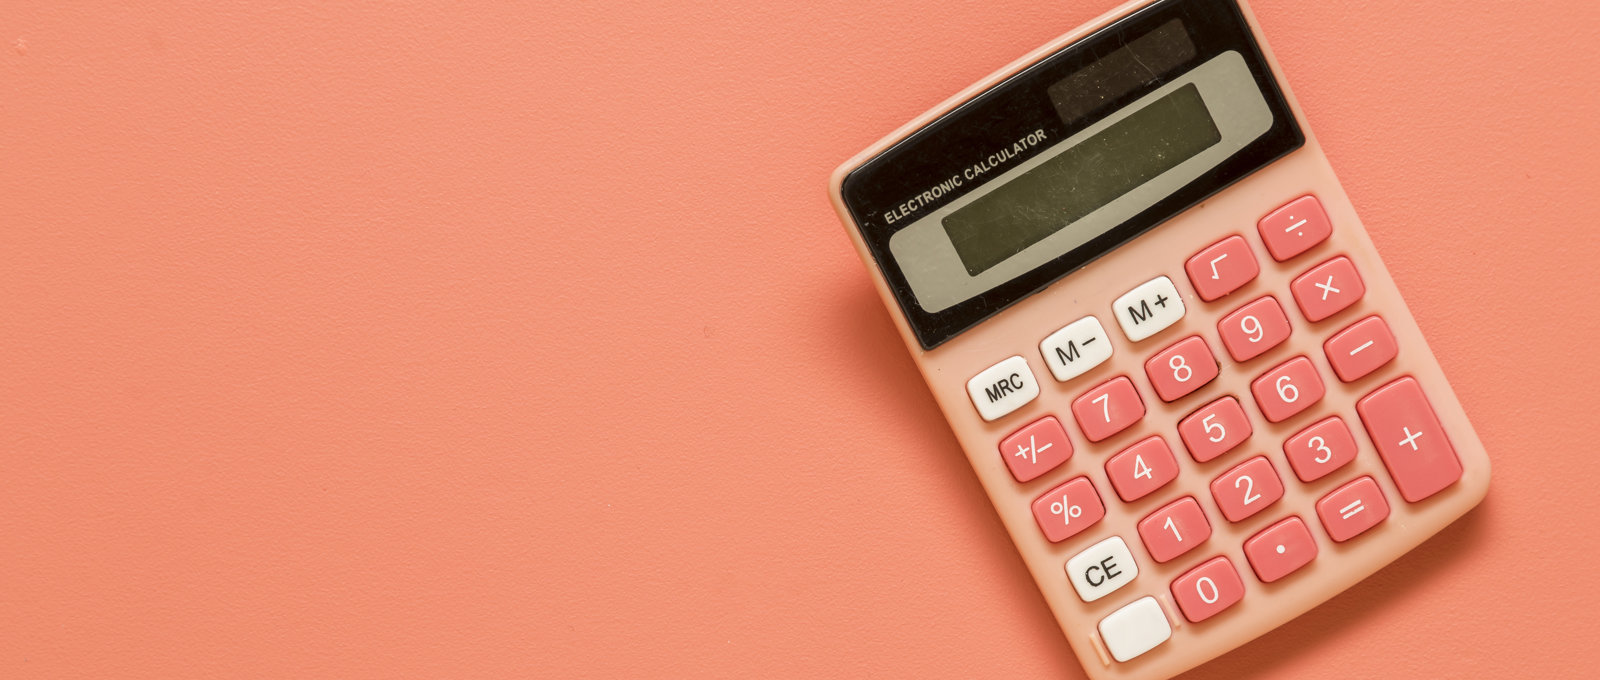 Photograph of a salmon-coloured calculator on a salmon-coloured background